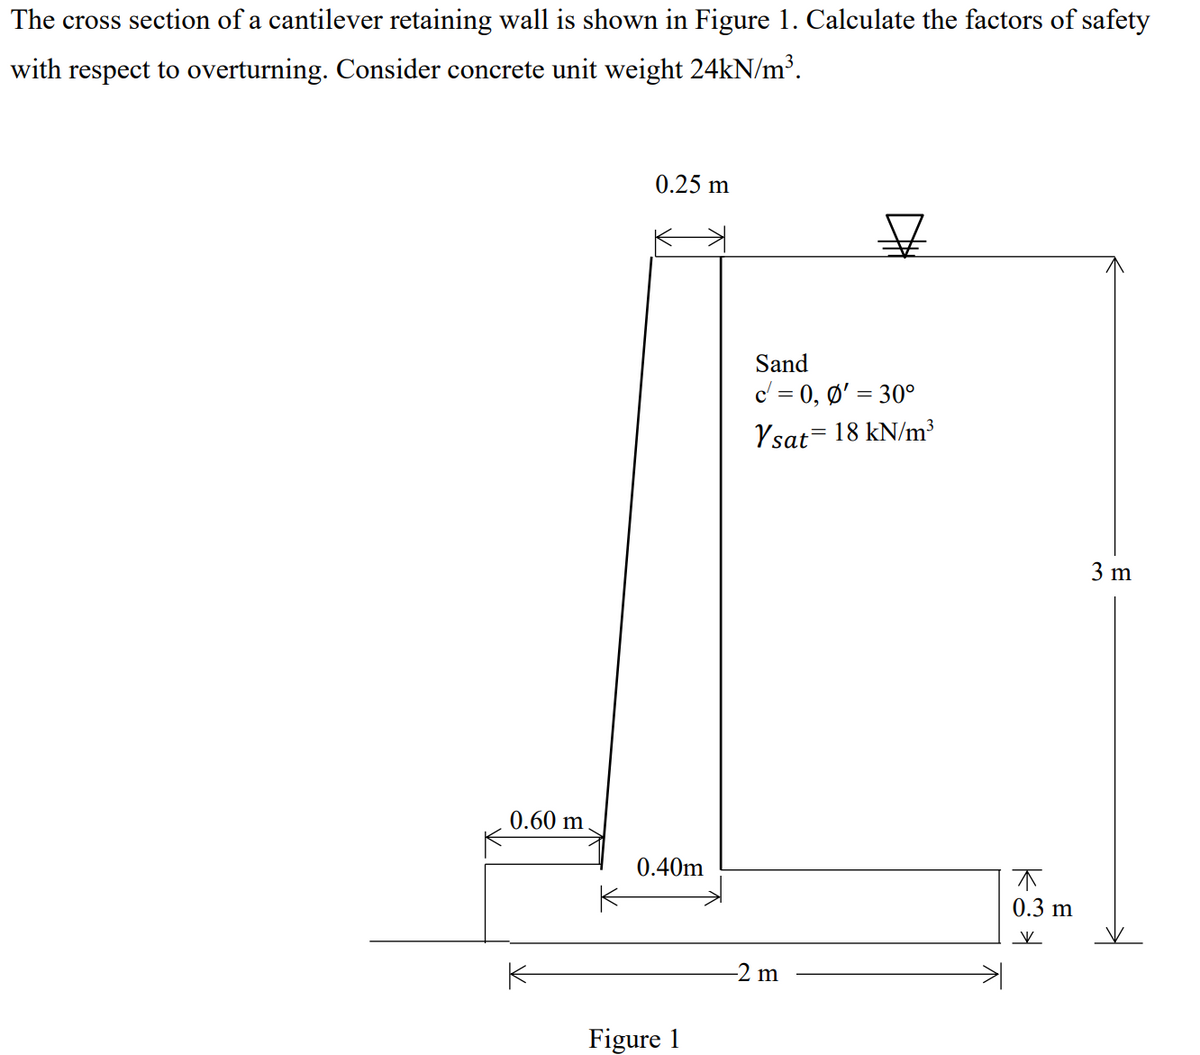 The cross section of a cantilever retaining wall is shown in Figure 1. Calculate the factors of safety
with respect to overturning. Consider concrete unit weight 24KN/m³.
0.25 m
Sand
c = 0, Ø' = 30°
Ysat= 18 kN/m³
3 m
0.60 m.
0.40m
0.3 m
-2 m
Figure 1
